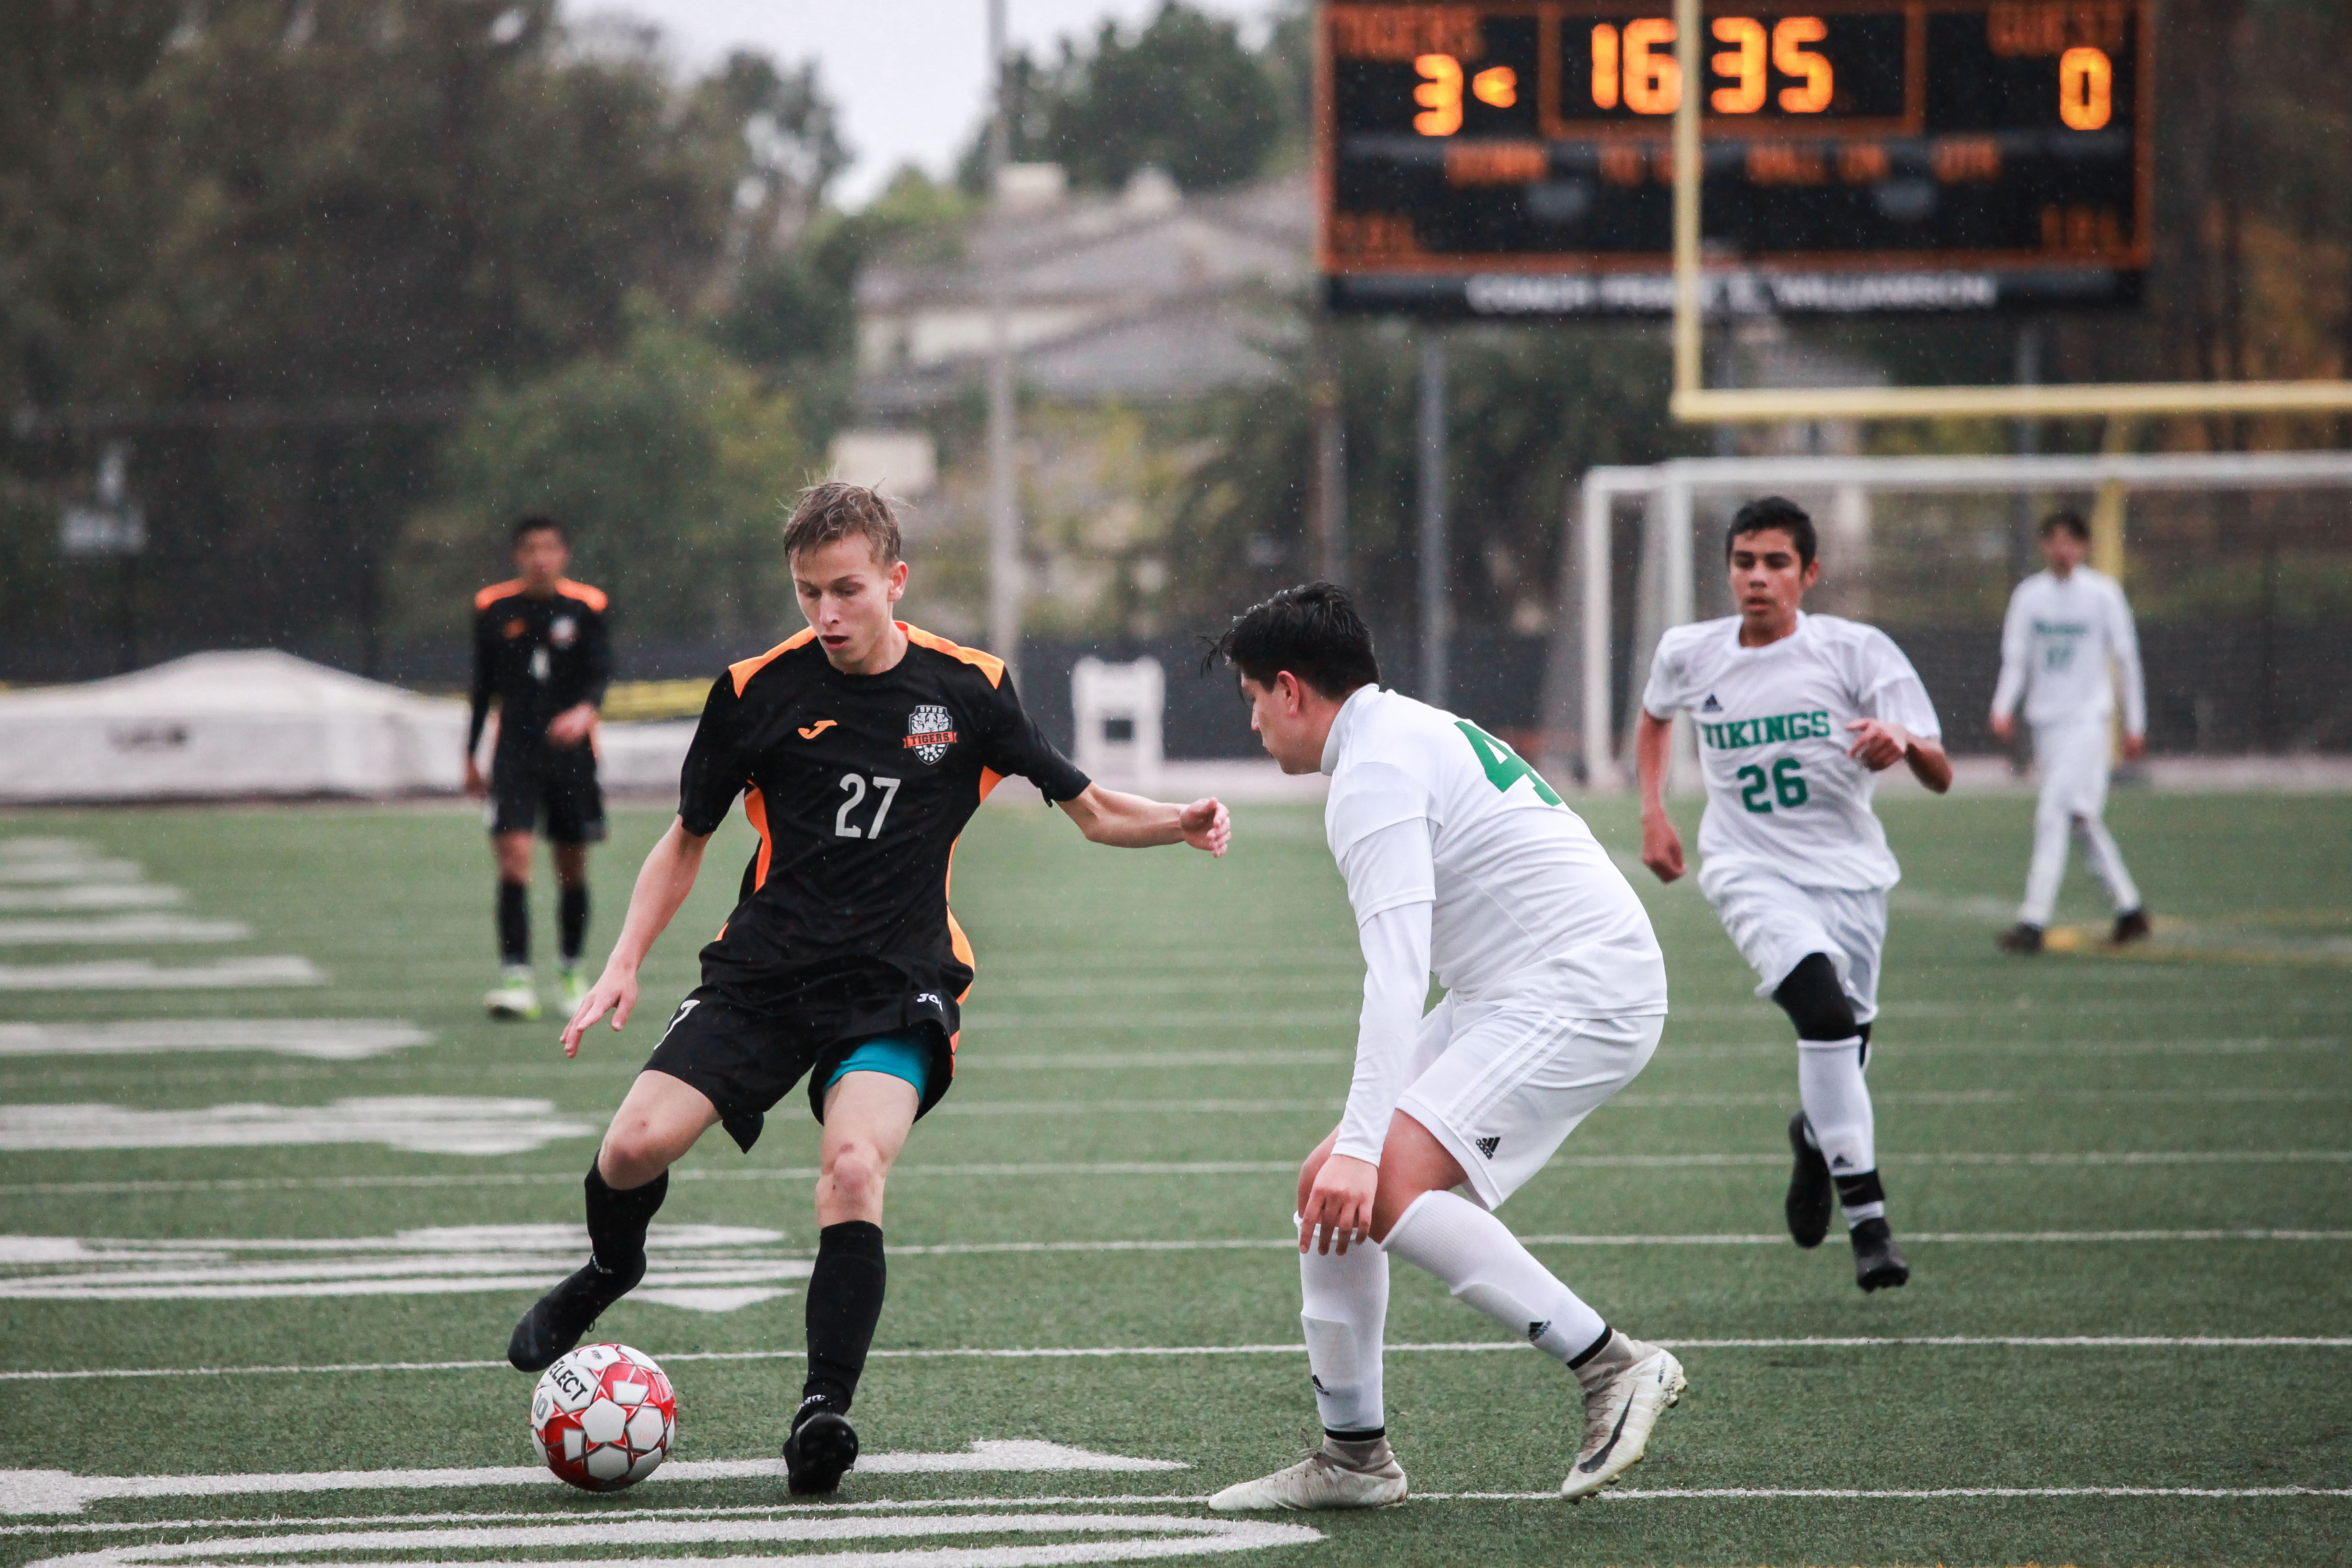 Thumbnail for Boys’ soccer falls short in heated contest